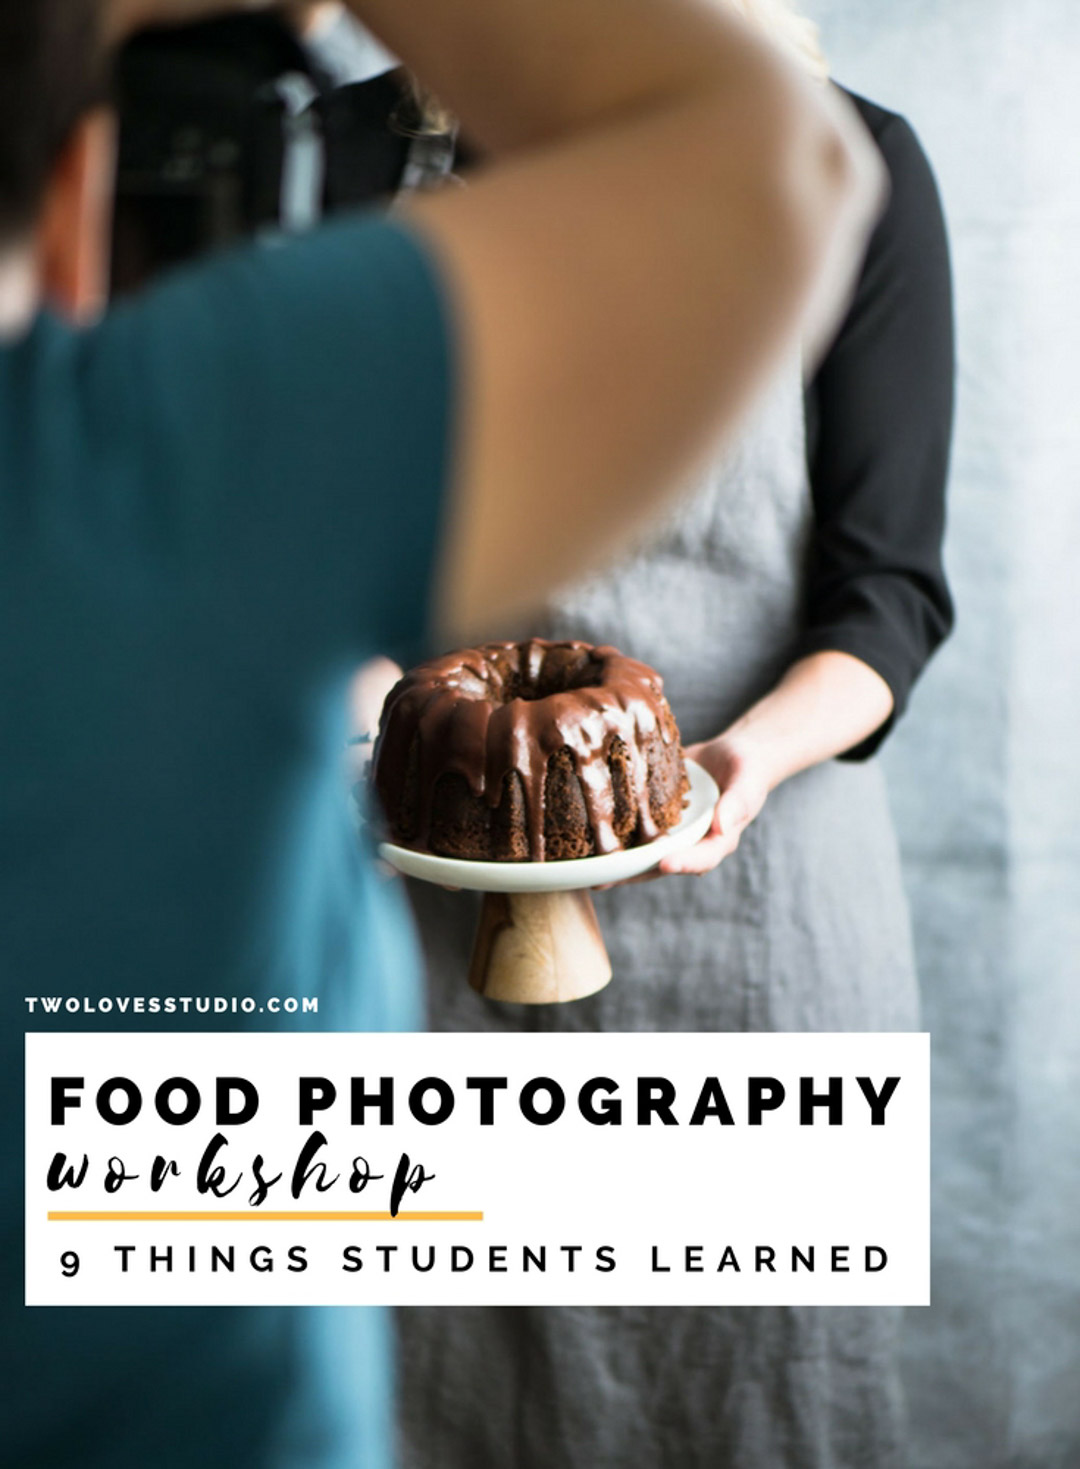 9 Things Attendees Learned at Our Toronto Composition and Styling Food Photography Workshop. Click to read and see the images!